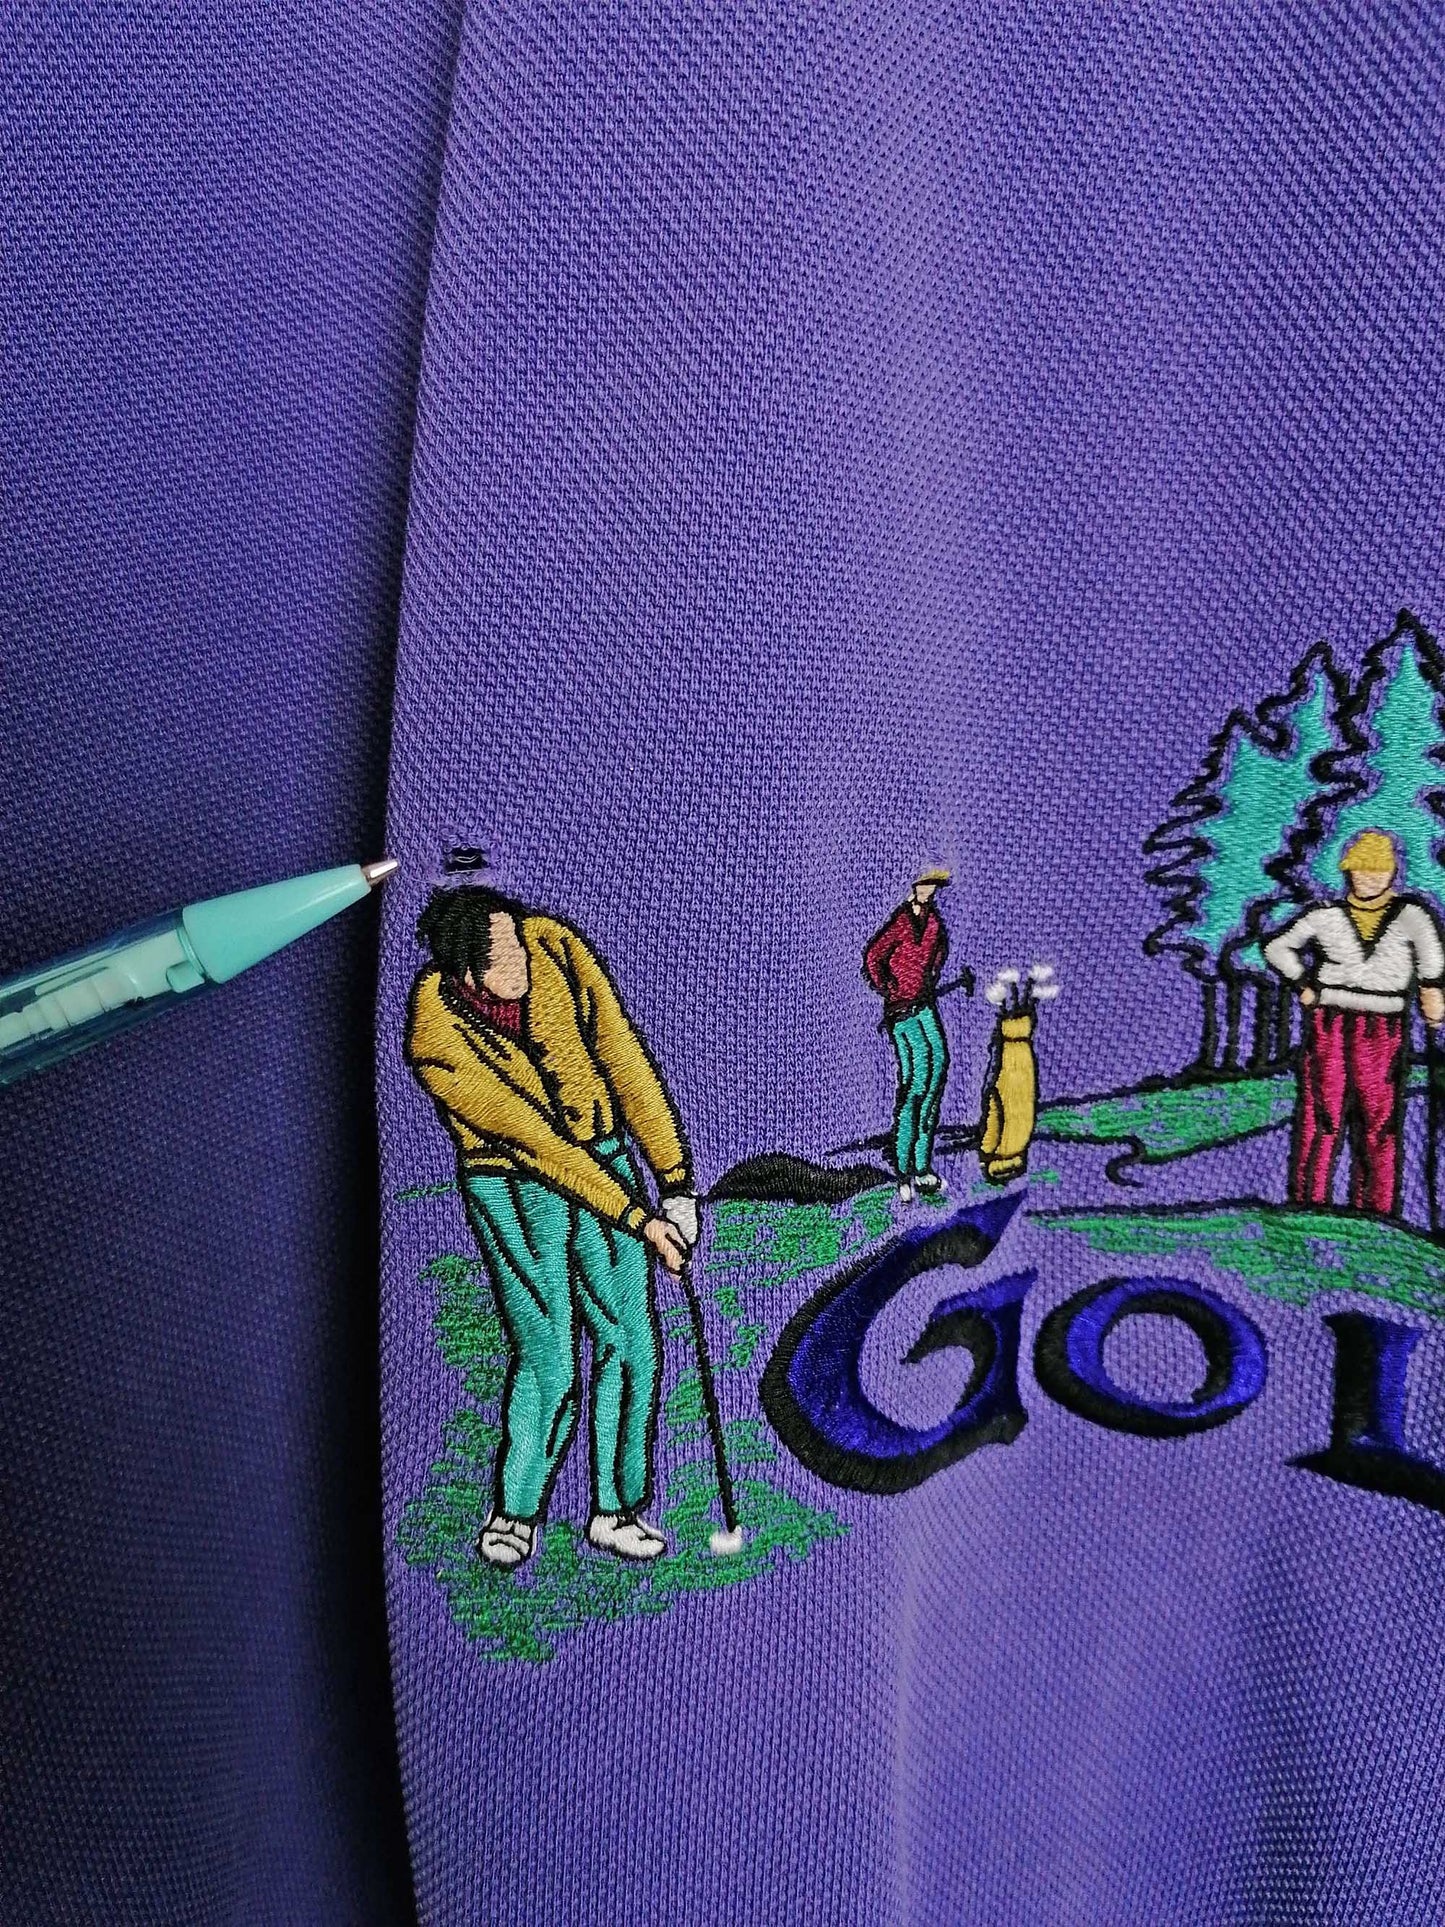 80's 90's CHEMISE LACOSTE Sweatshirt Golf Embroidery -size M-L